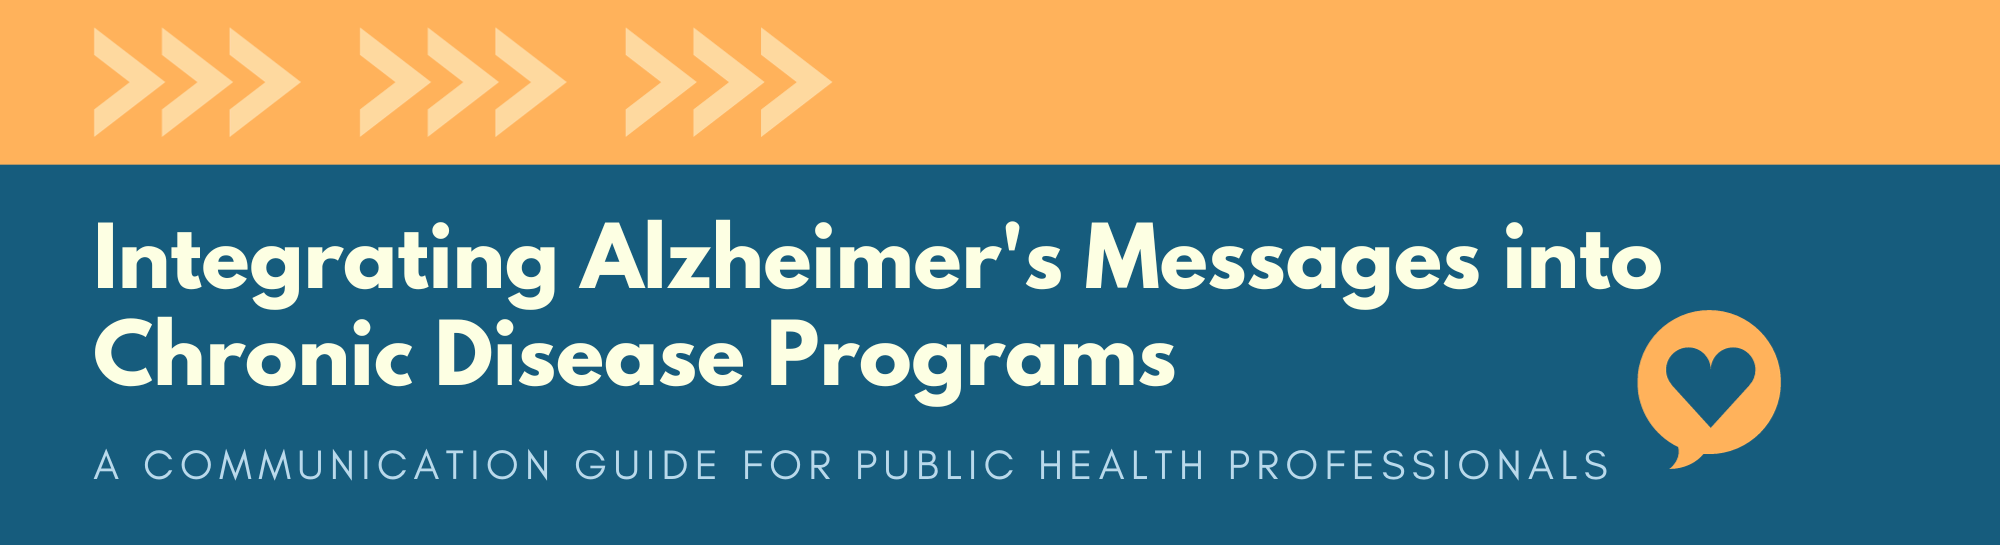 Integrating Alzheimer's Messages into Chronic Disease Programs. A communication guide for public health professionals.